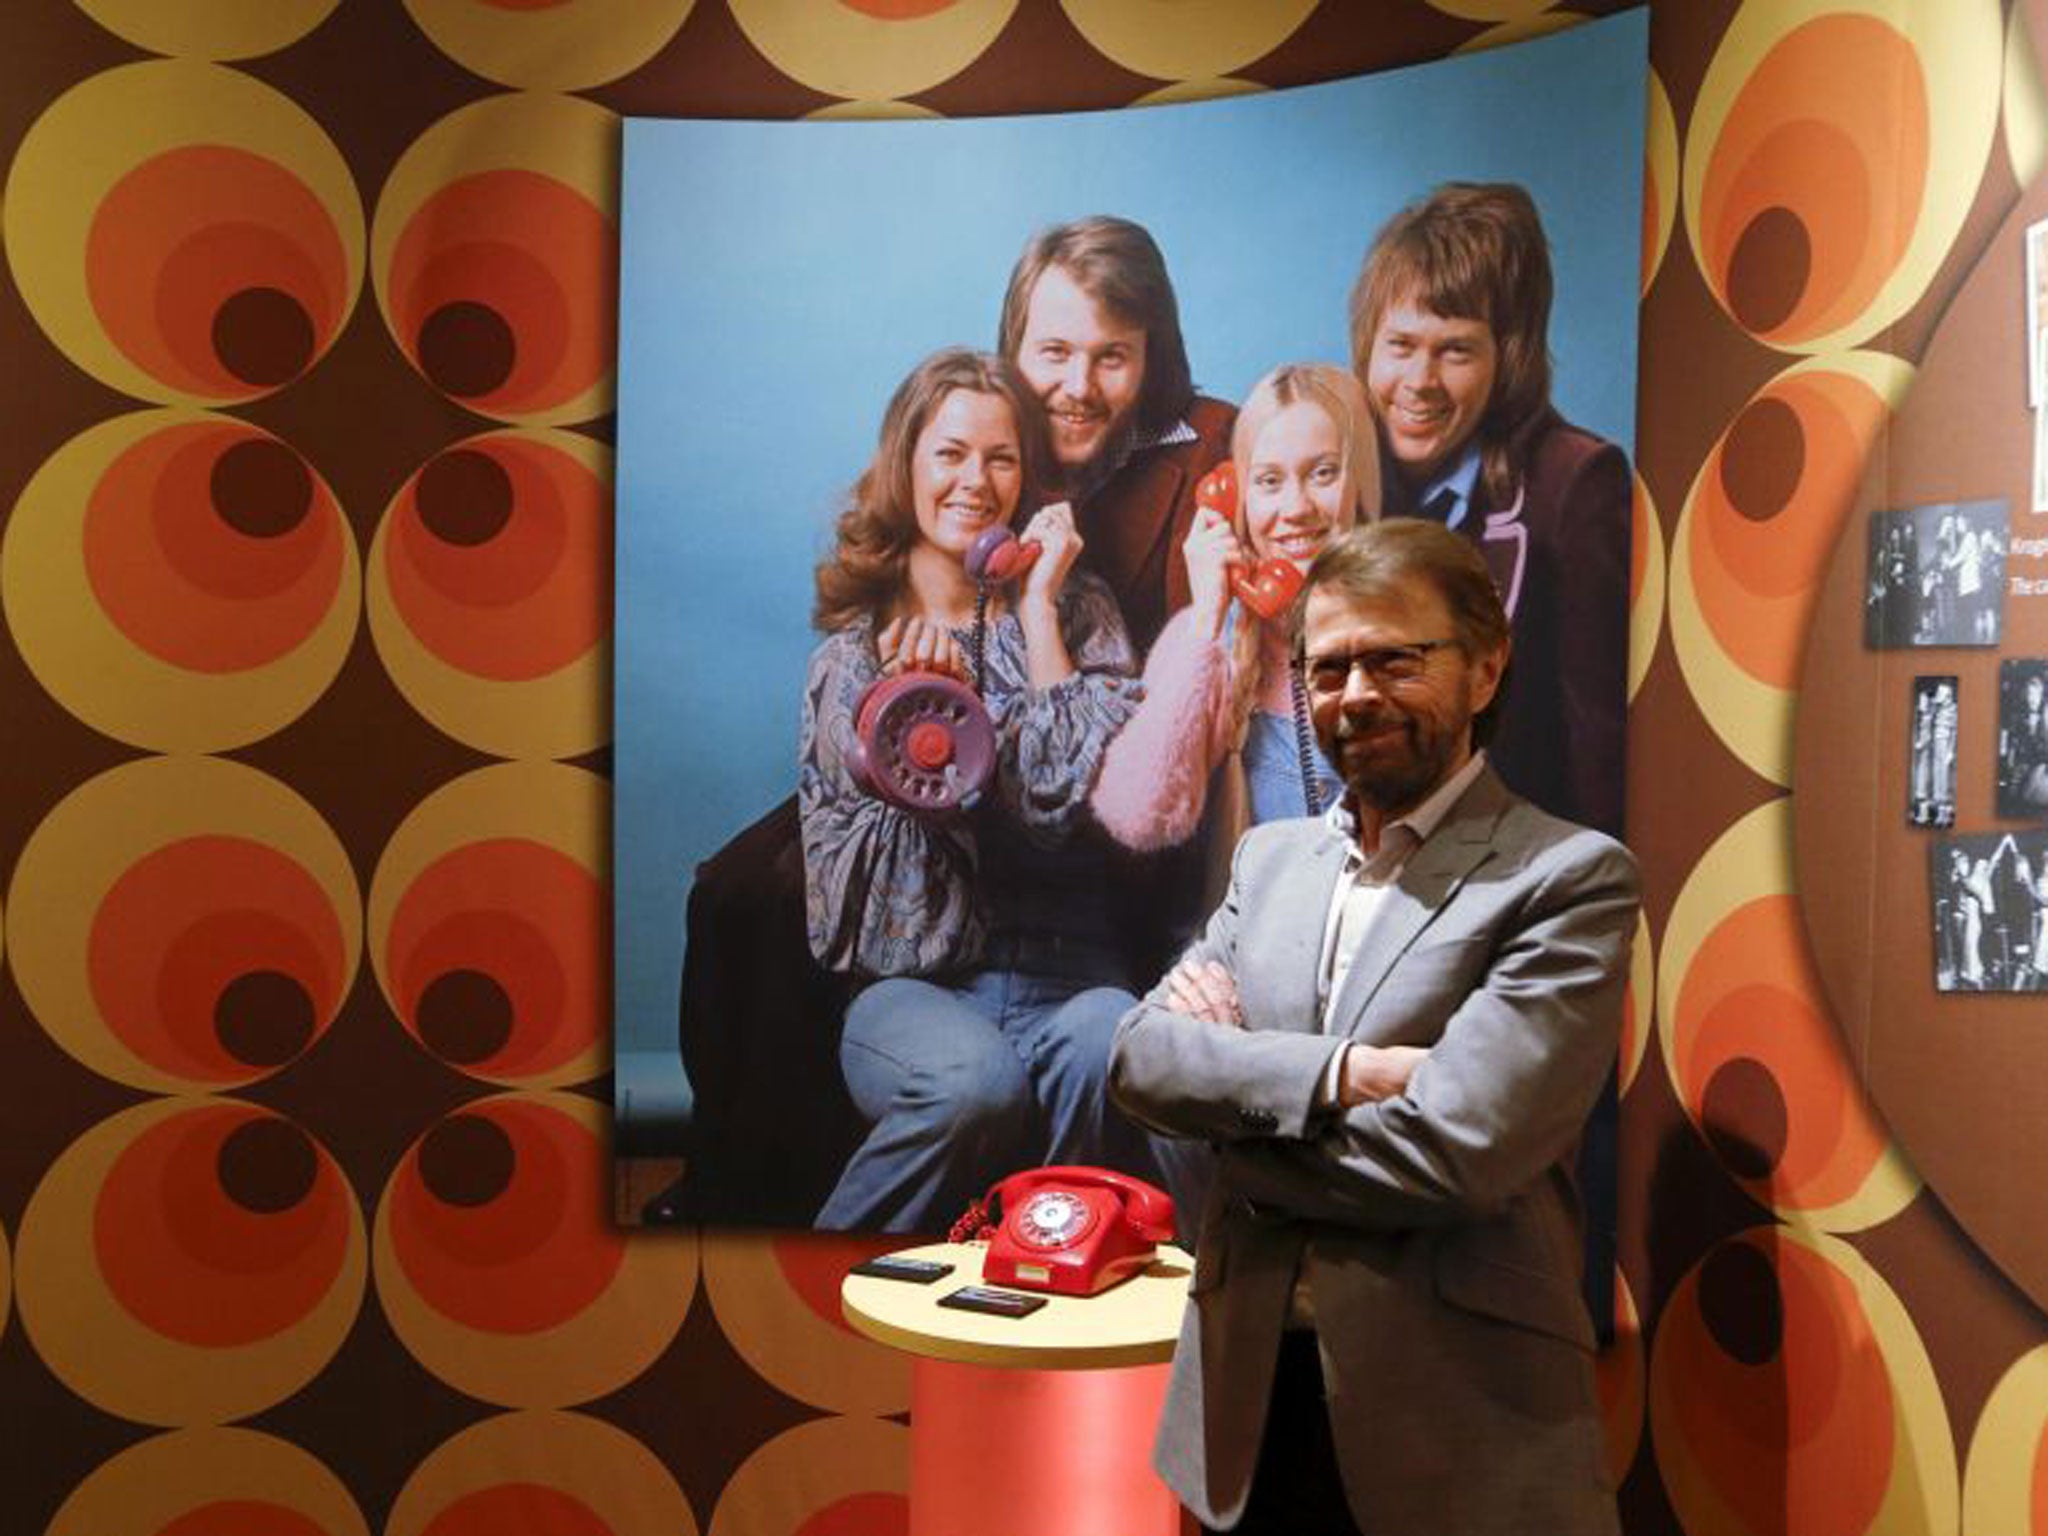 Former ABBA member Bjorn Ulvaeus poses for the media in front of an exhibit at the new ABBA - The Museum in Stockholm